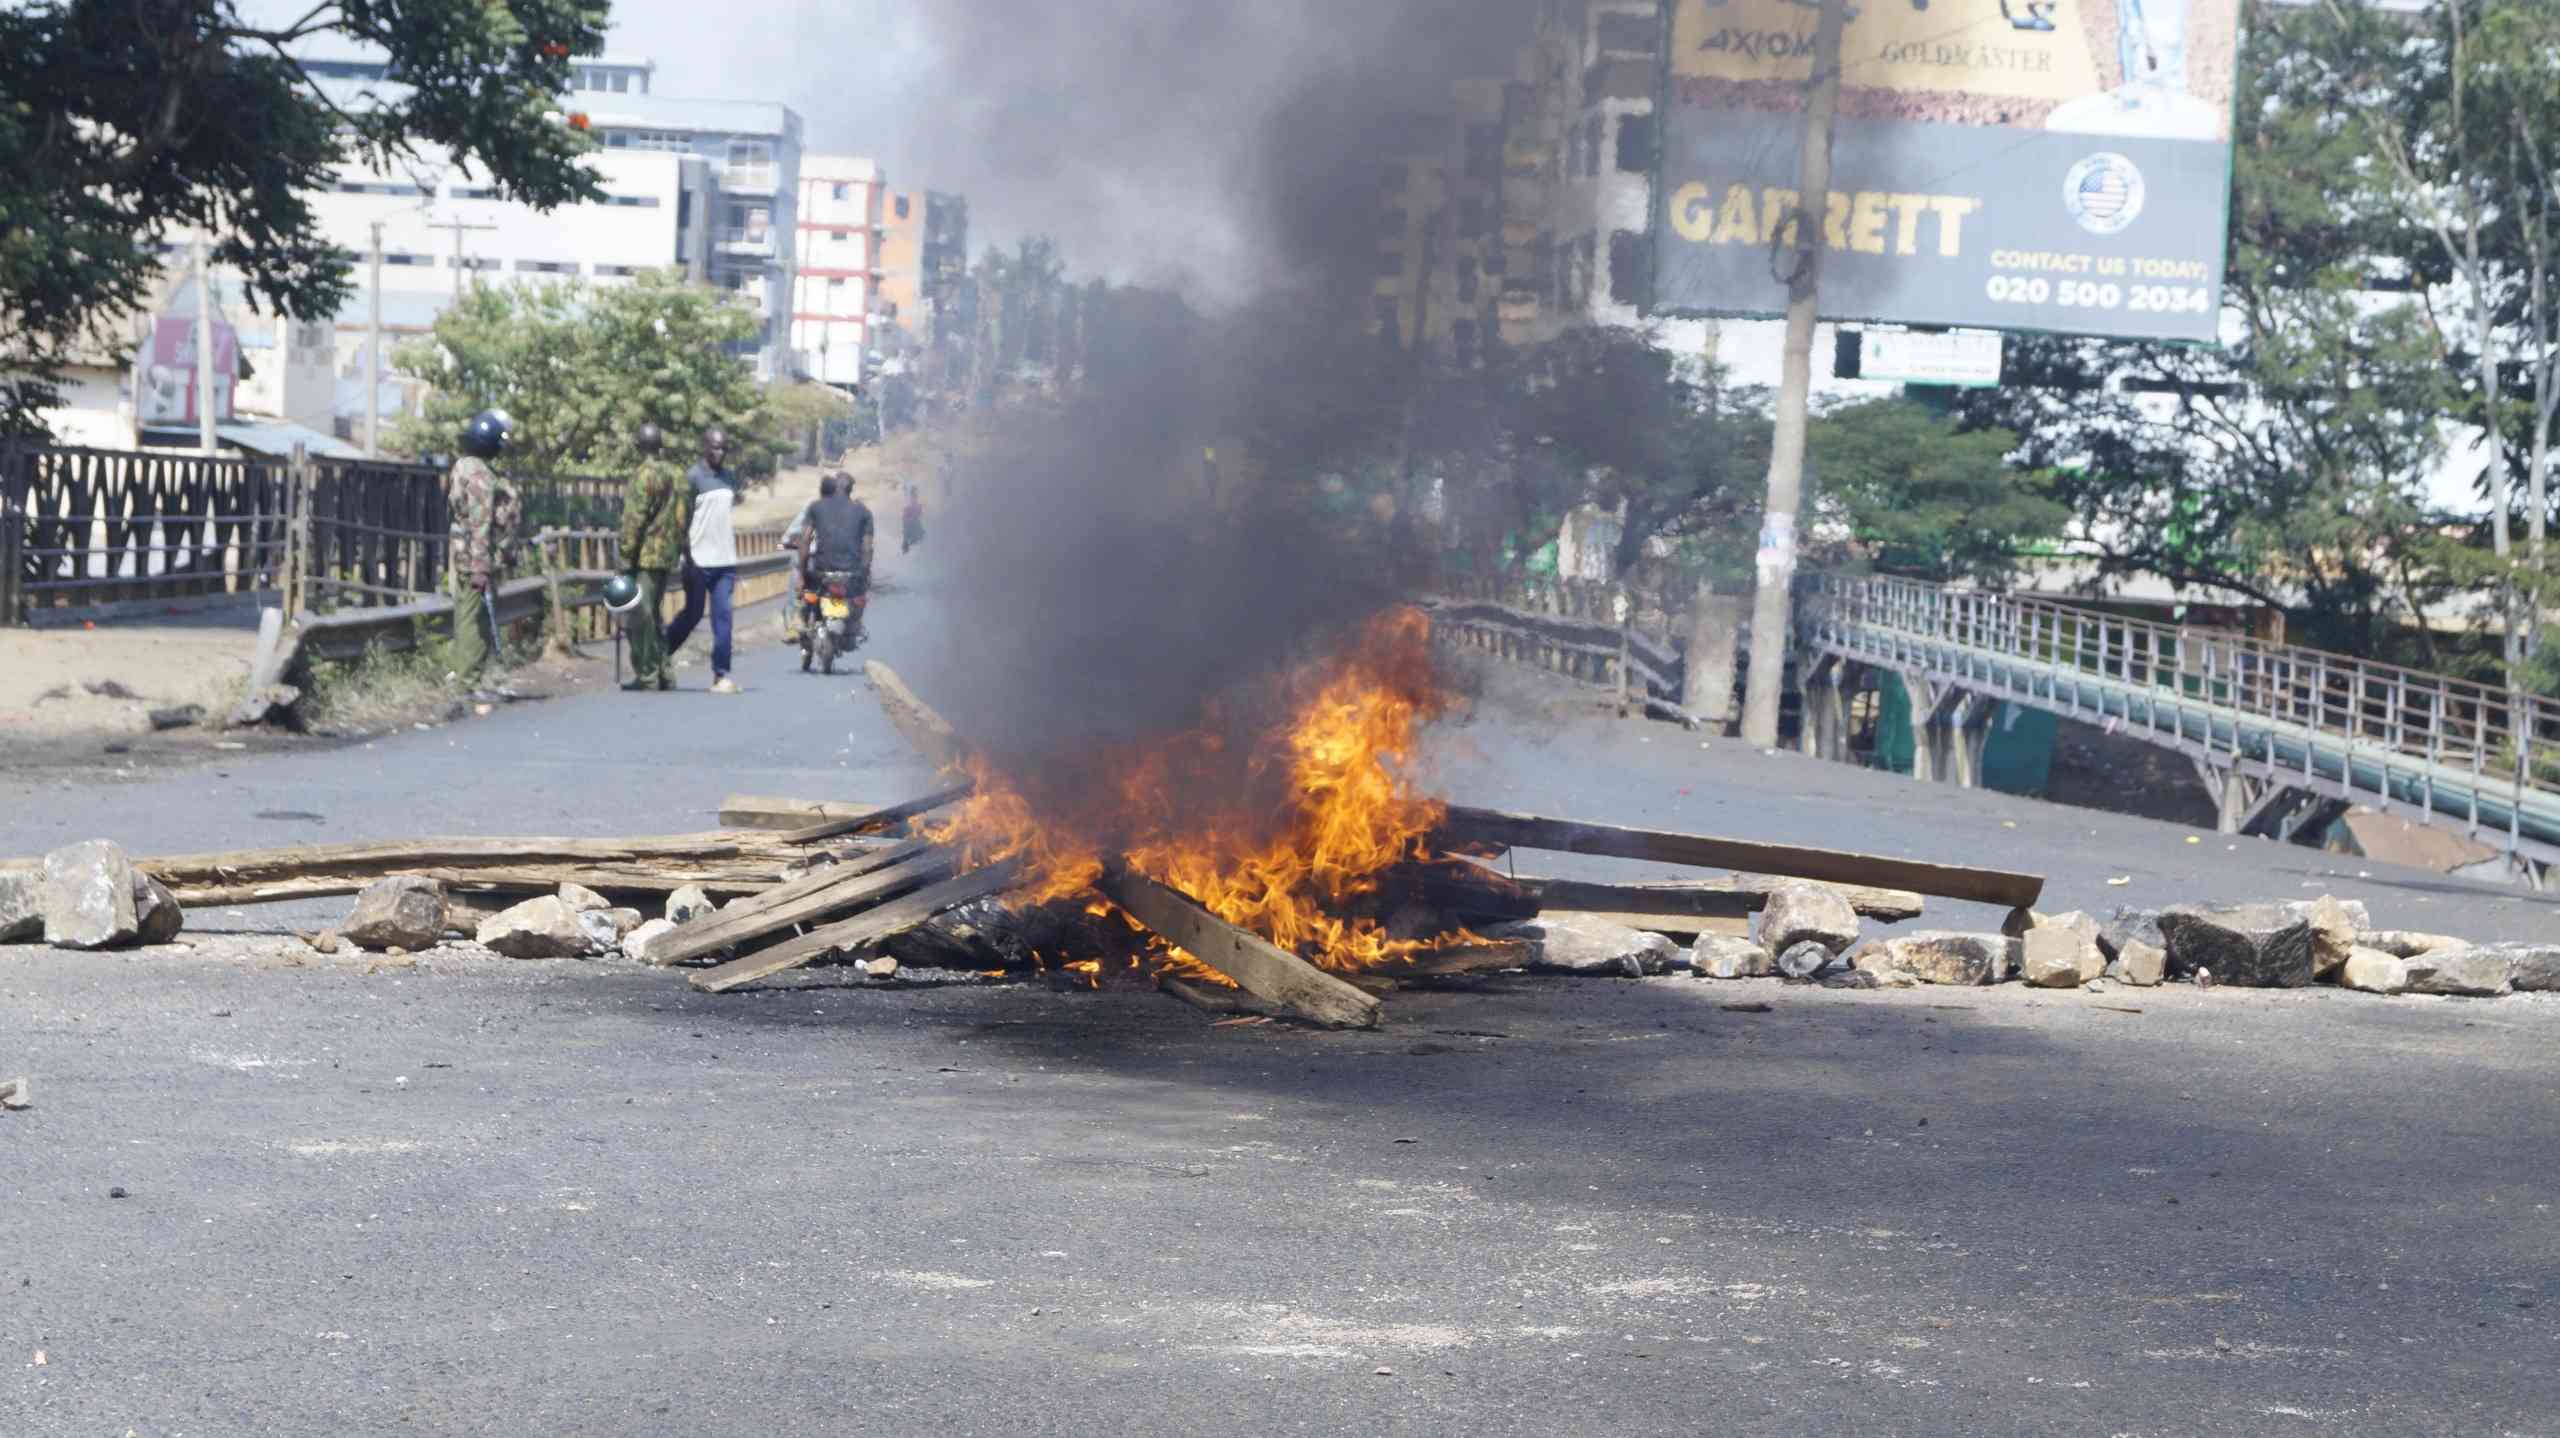 Businesses shut, little activity as protests continue in Kisii, Migori